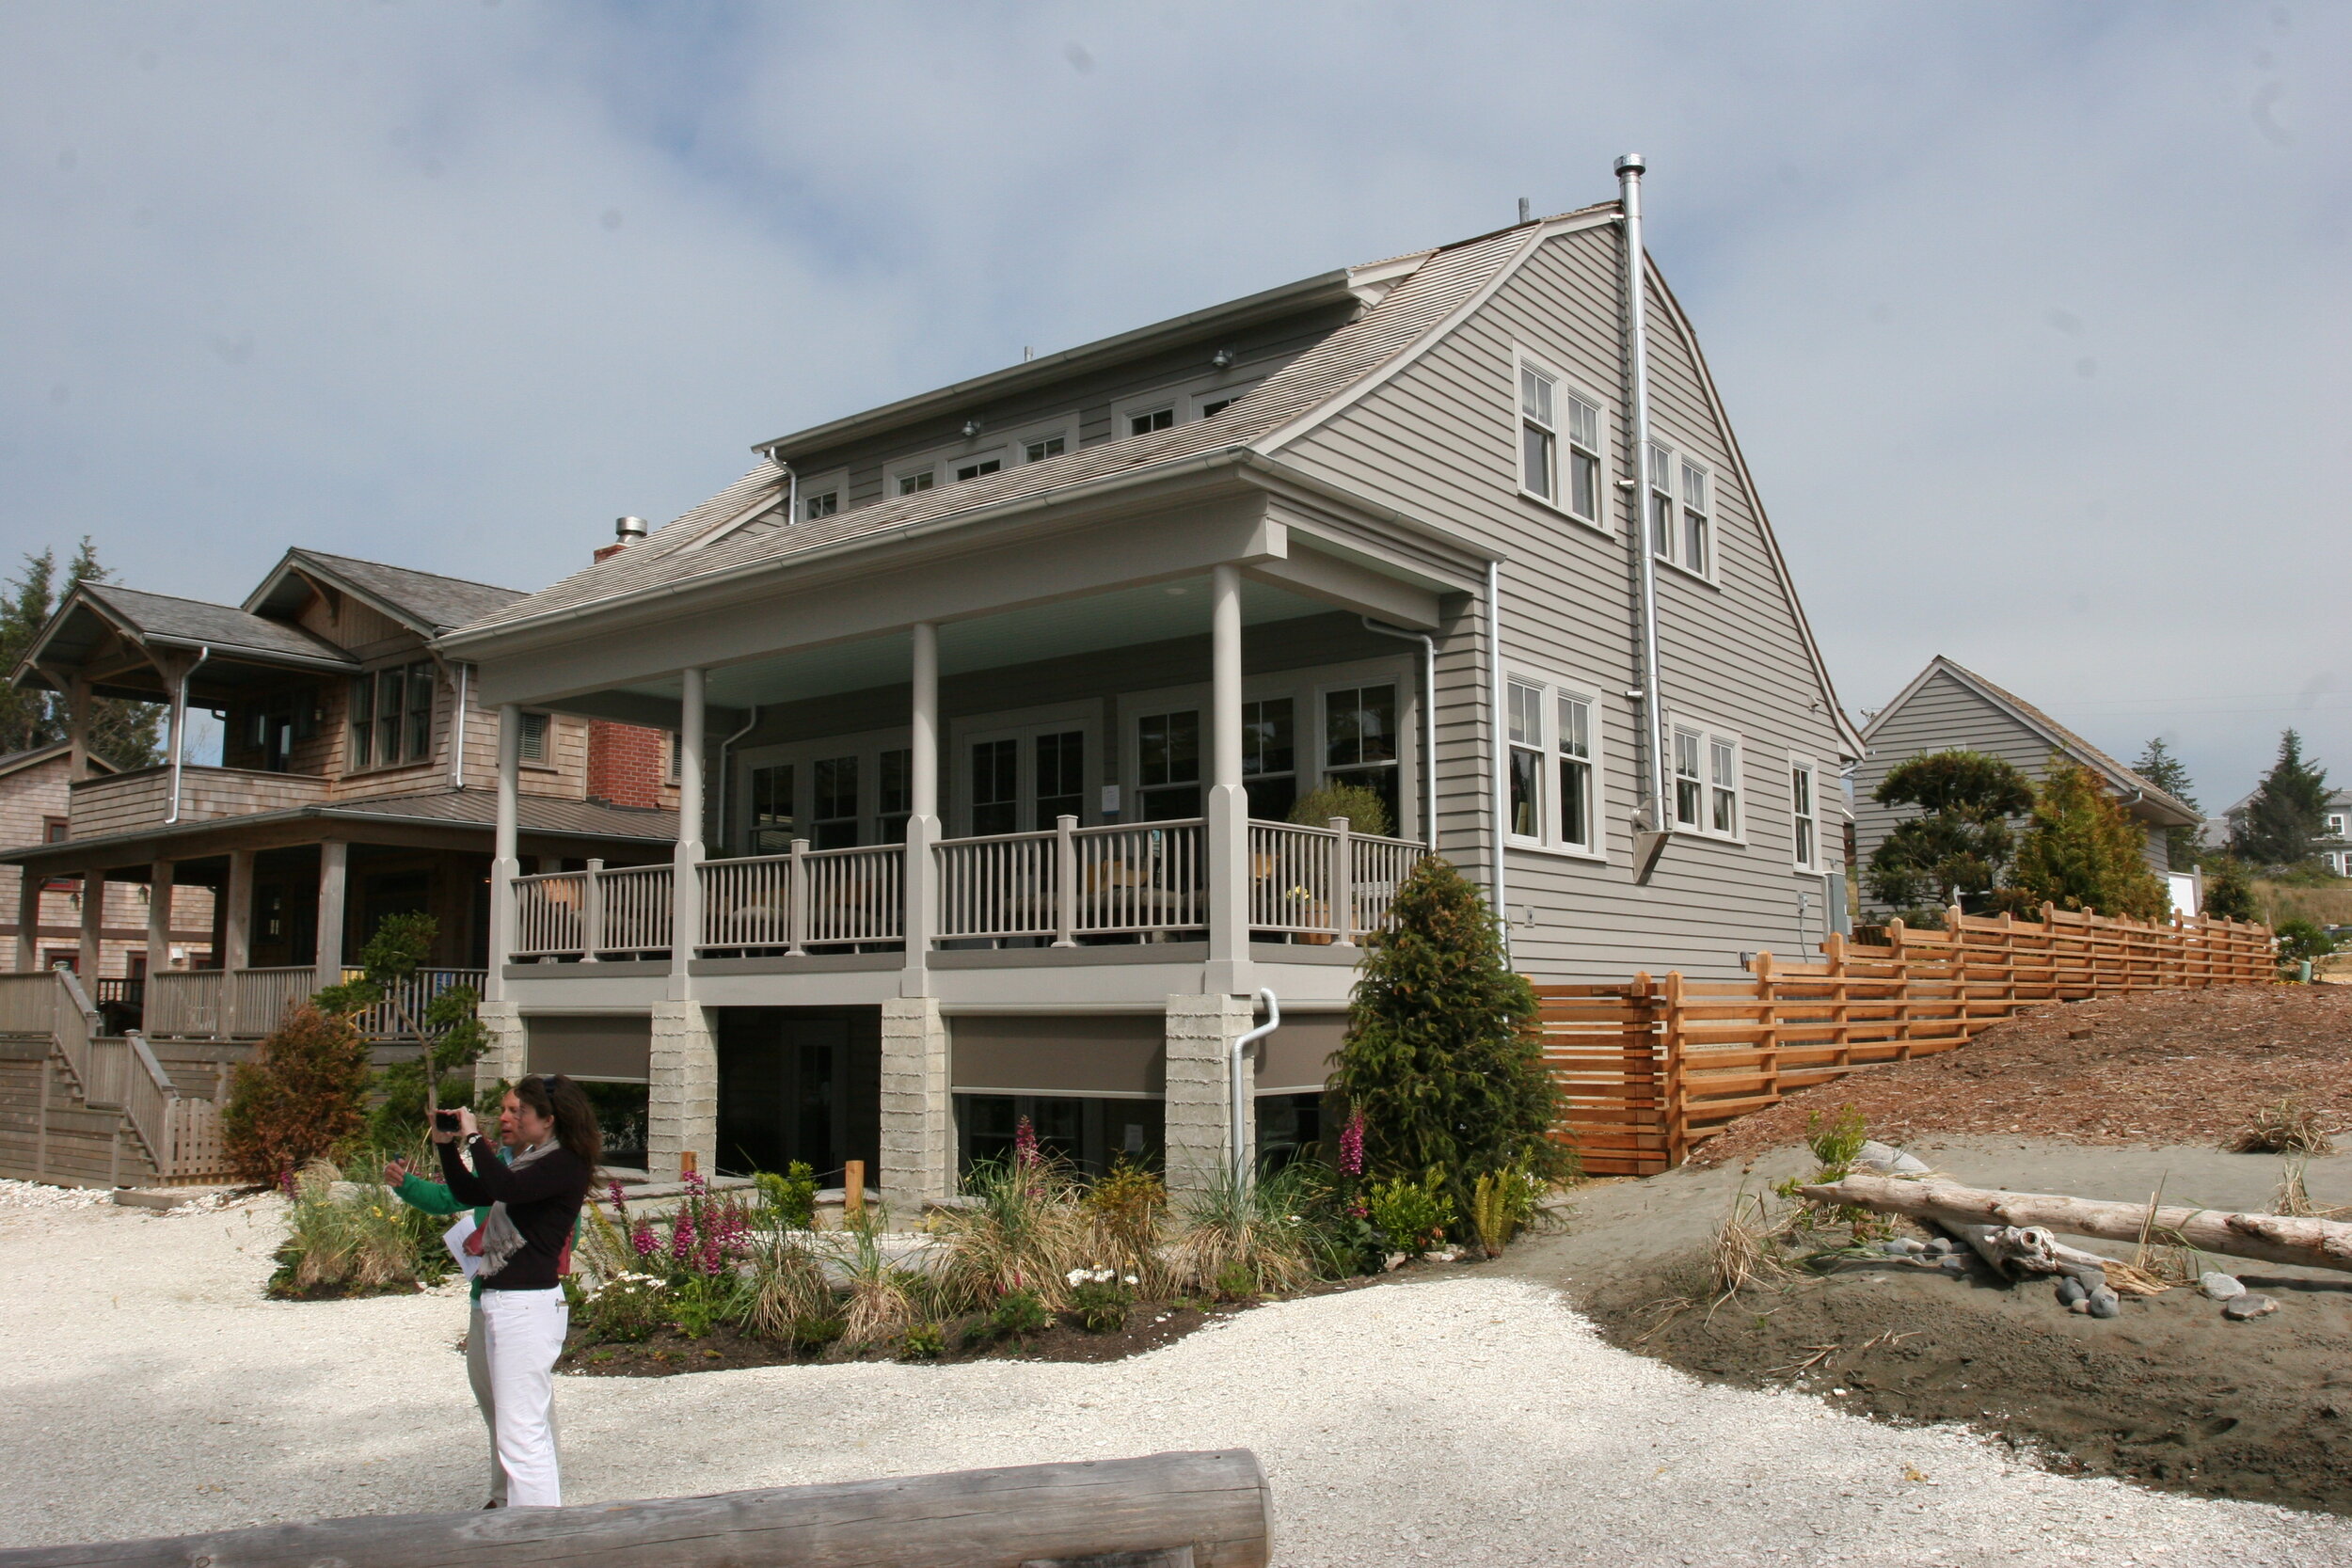 Meet the designer, project team, and developers behind the 2010 Seabrook Idea House.